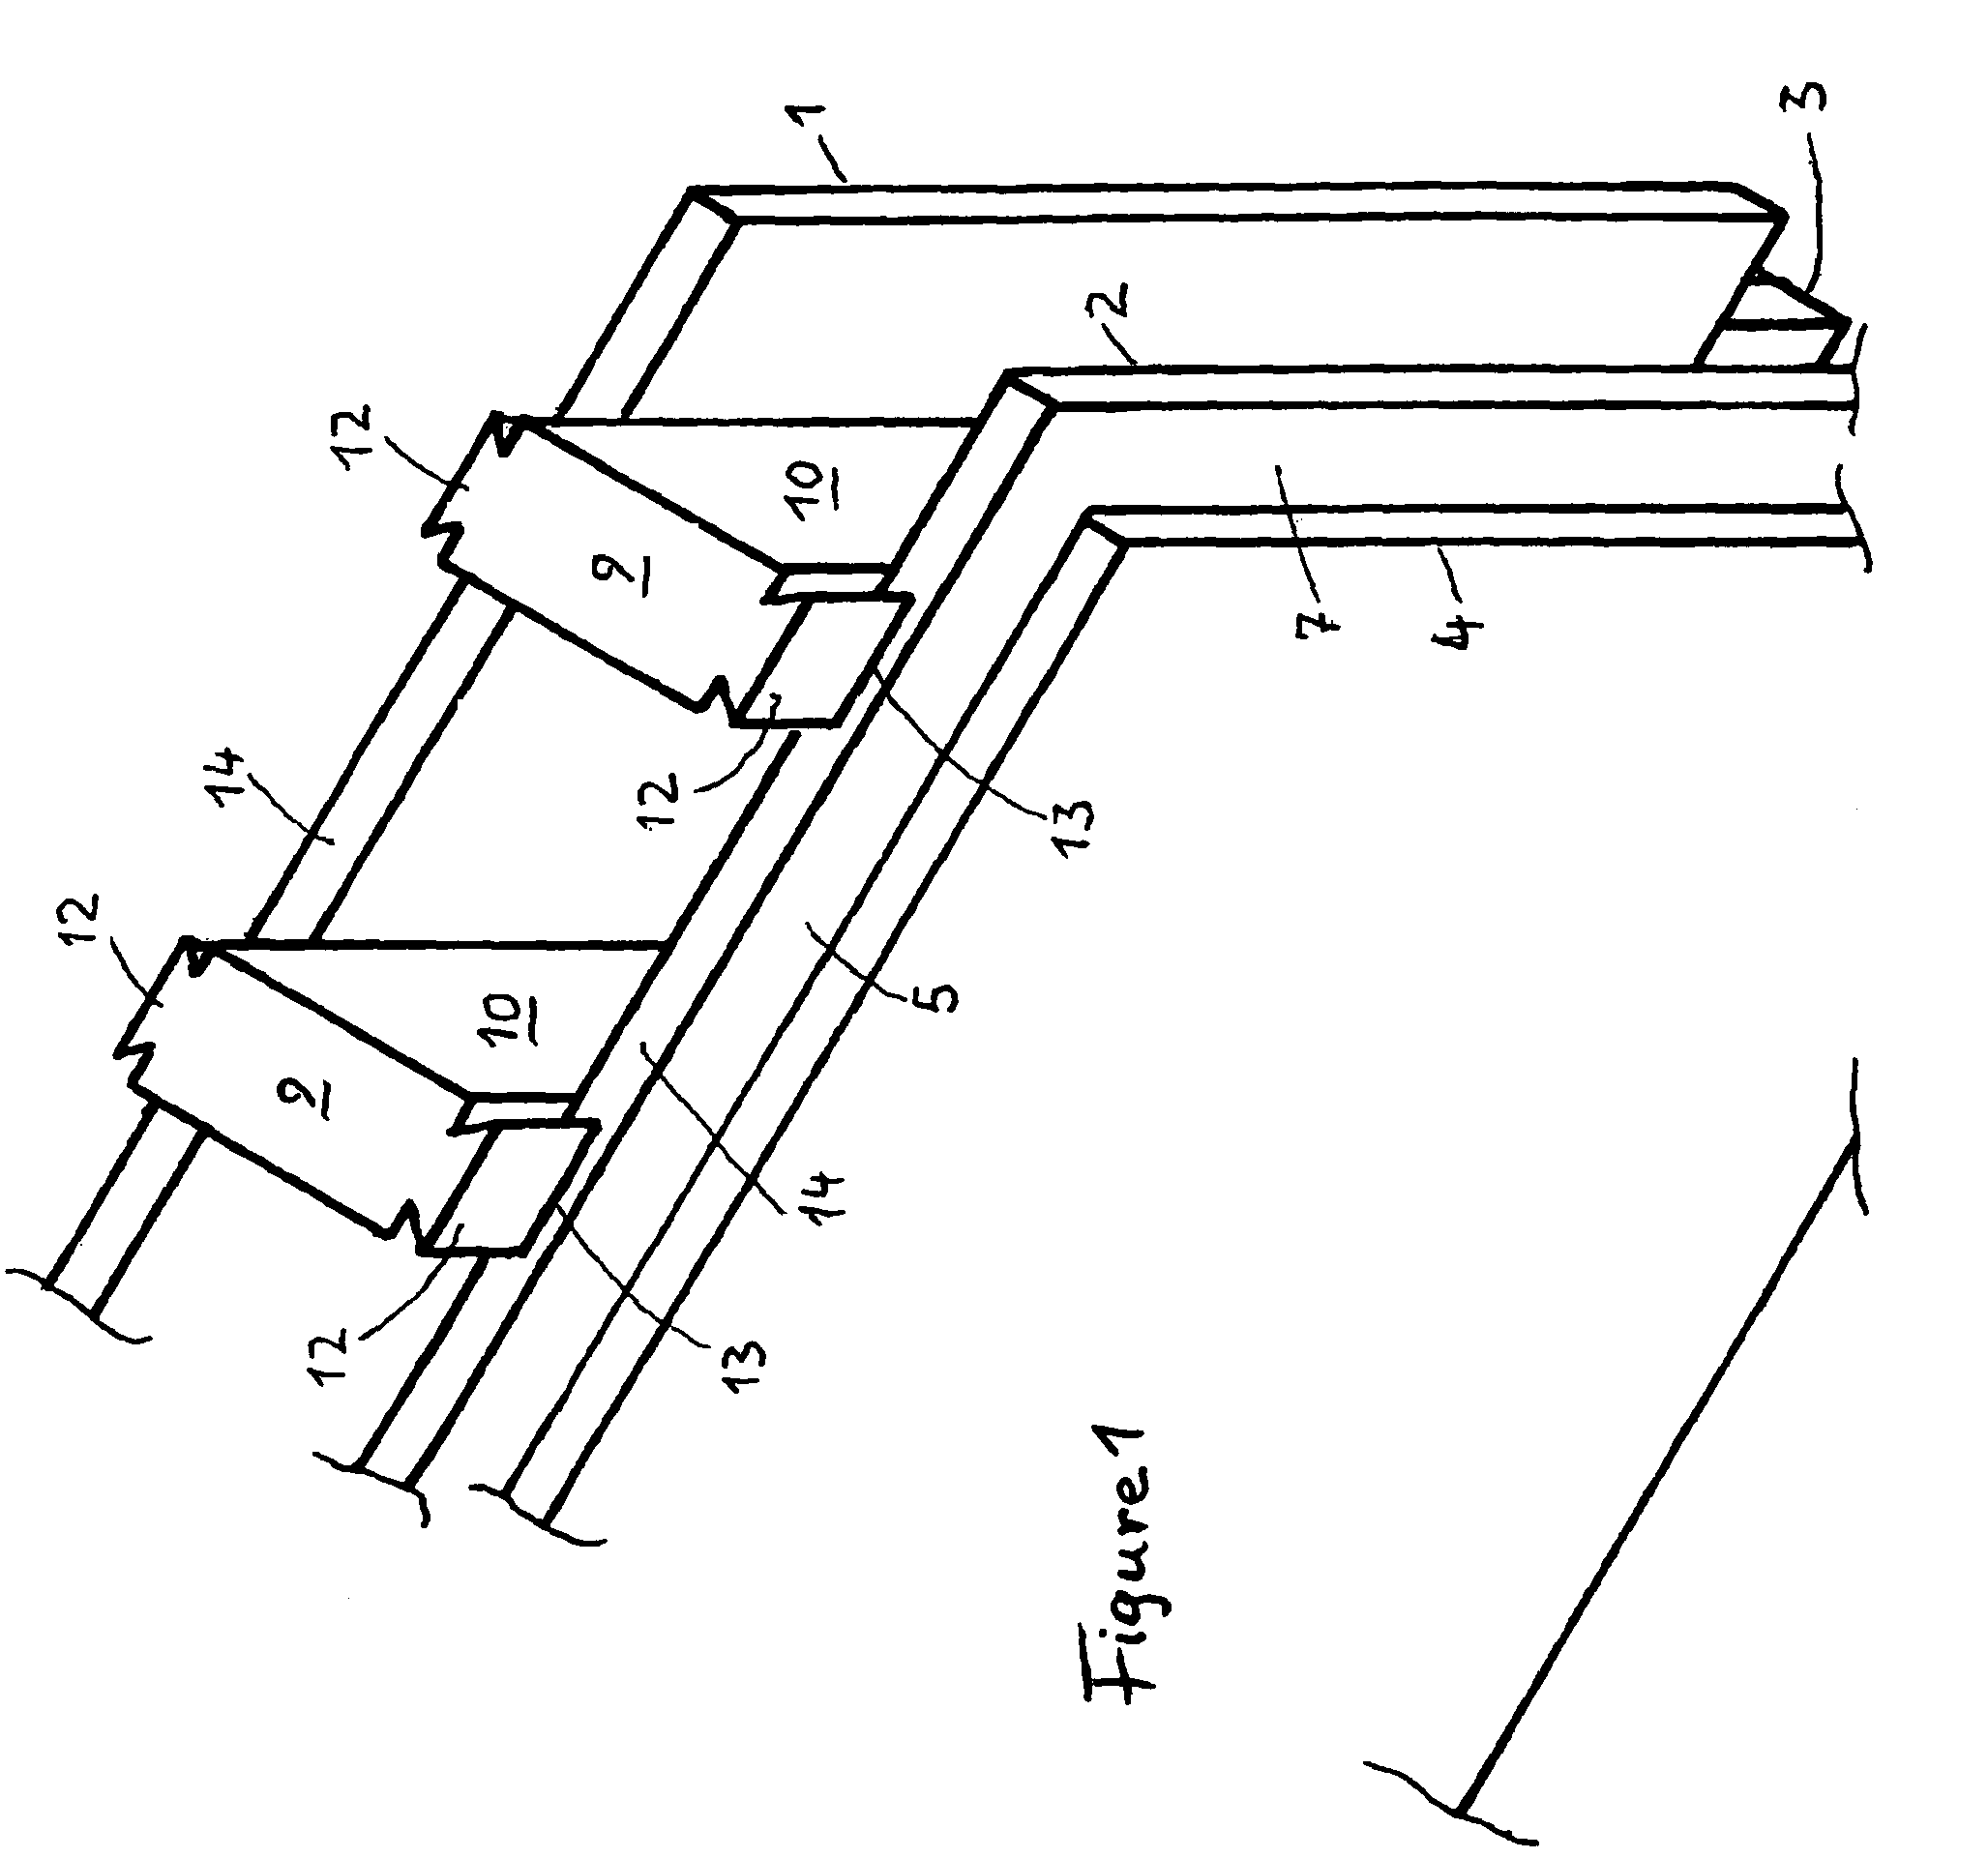 Wooden building element for constructing the walls of a building